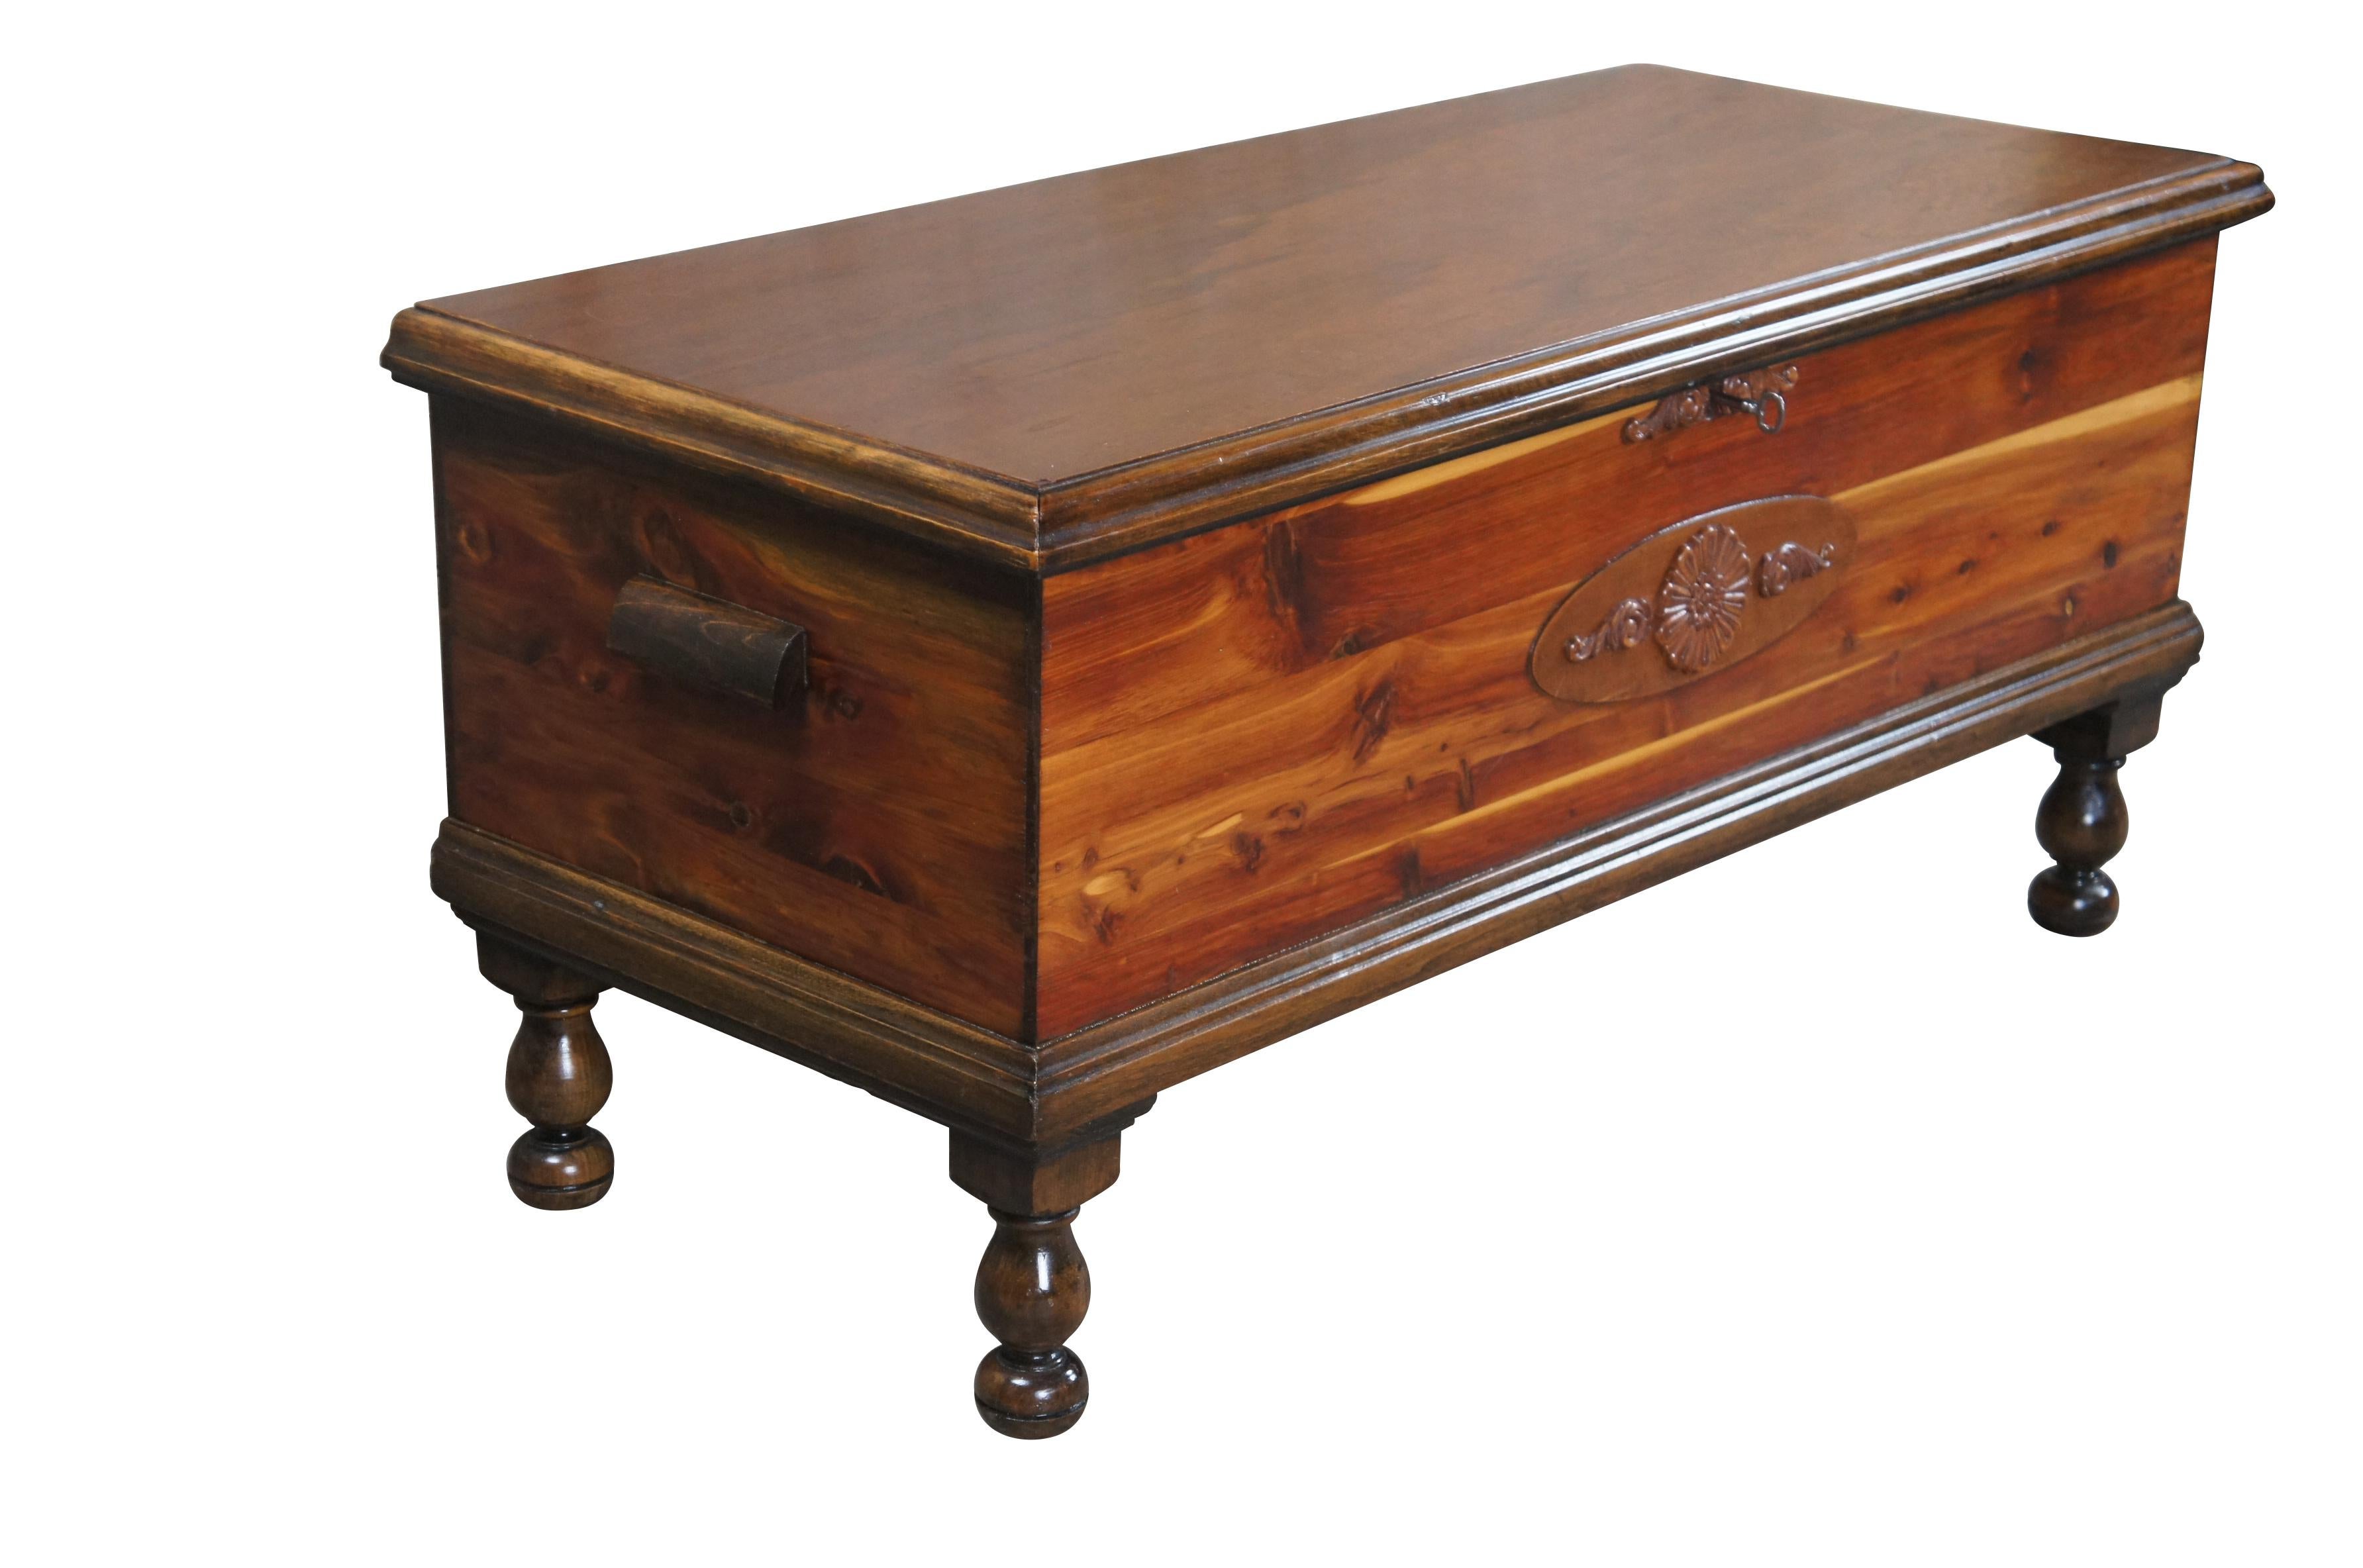 An antique cedar trunk by E.R. Co,  circa 1940s.  Features a primitive American Country design with footed base, carved embellishments along the front and handles at the sides.  The trunk is hinged and cedar lined.  Part of E.R. Co's Forest Park